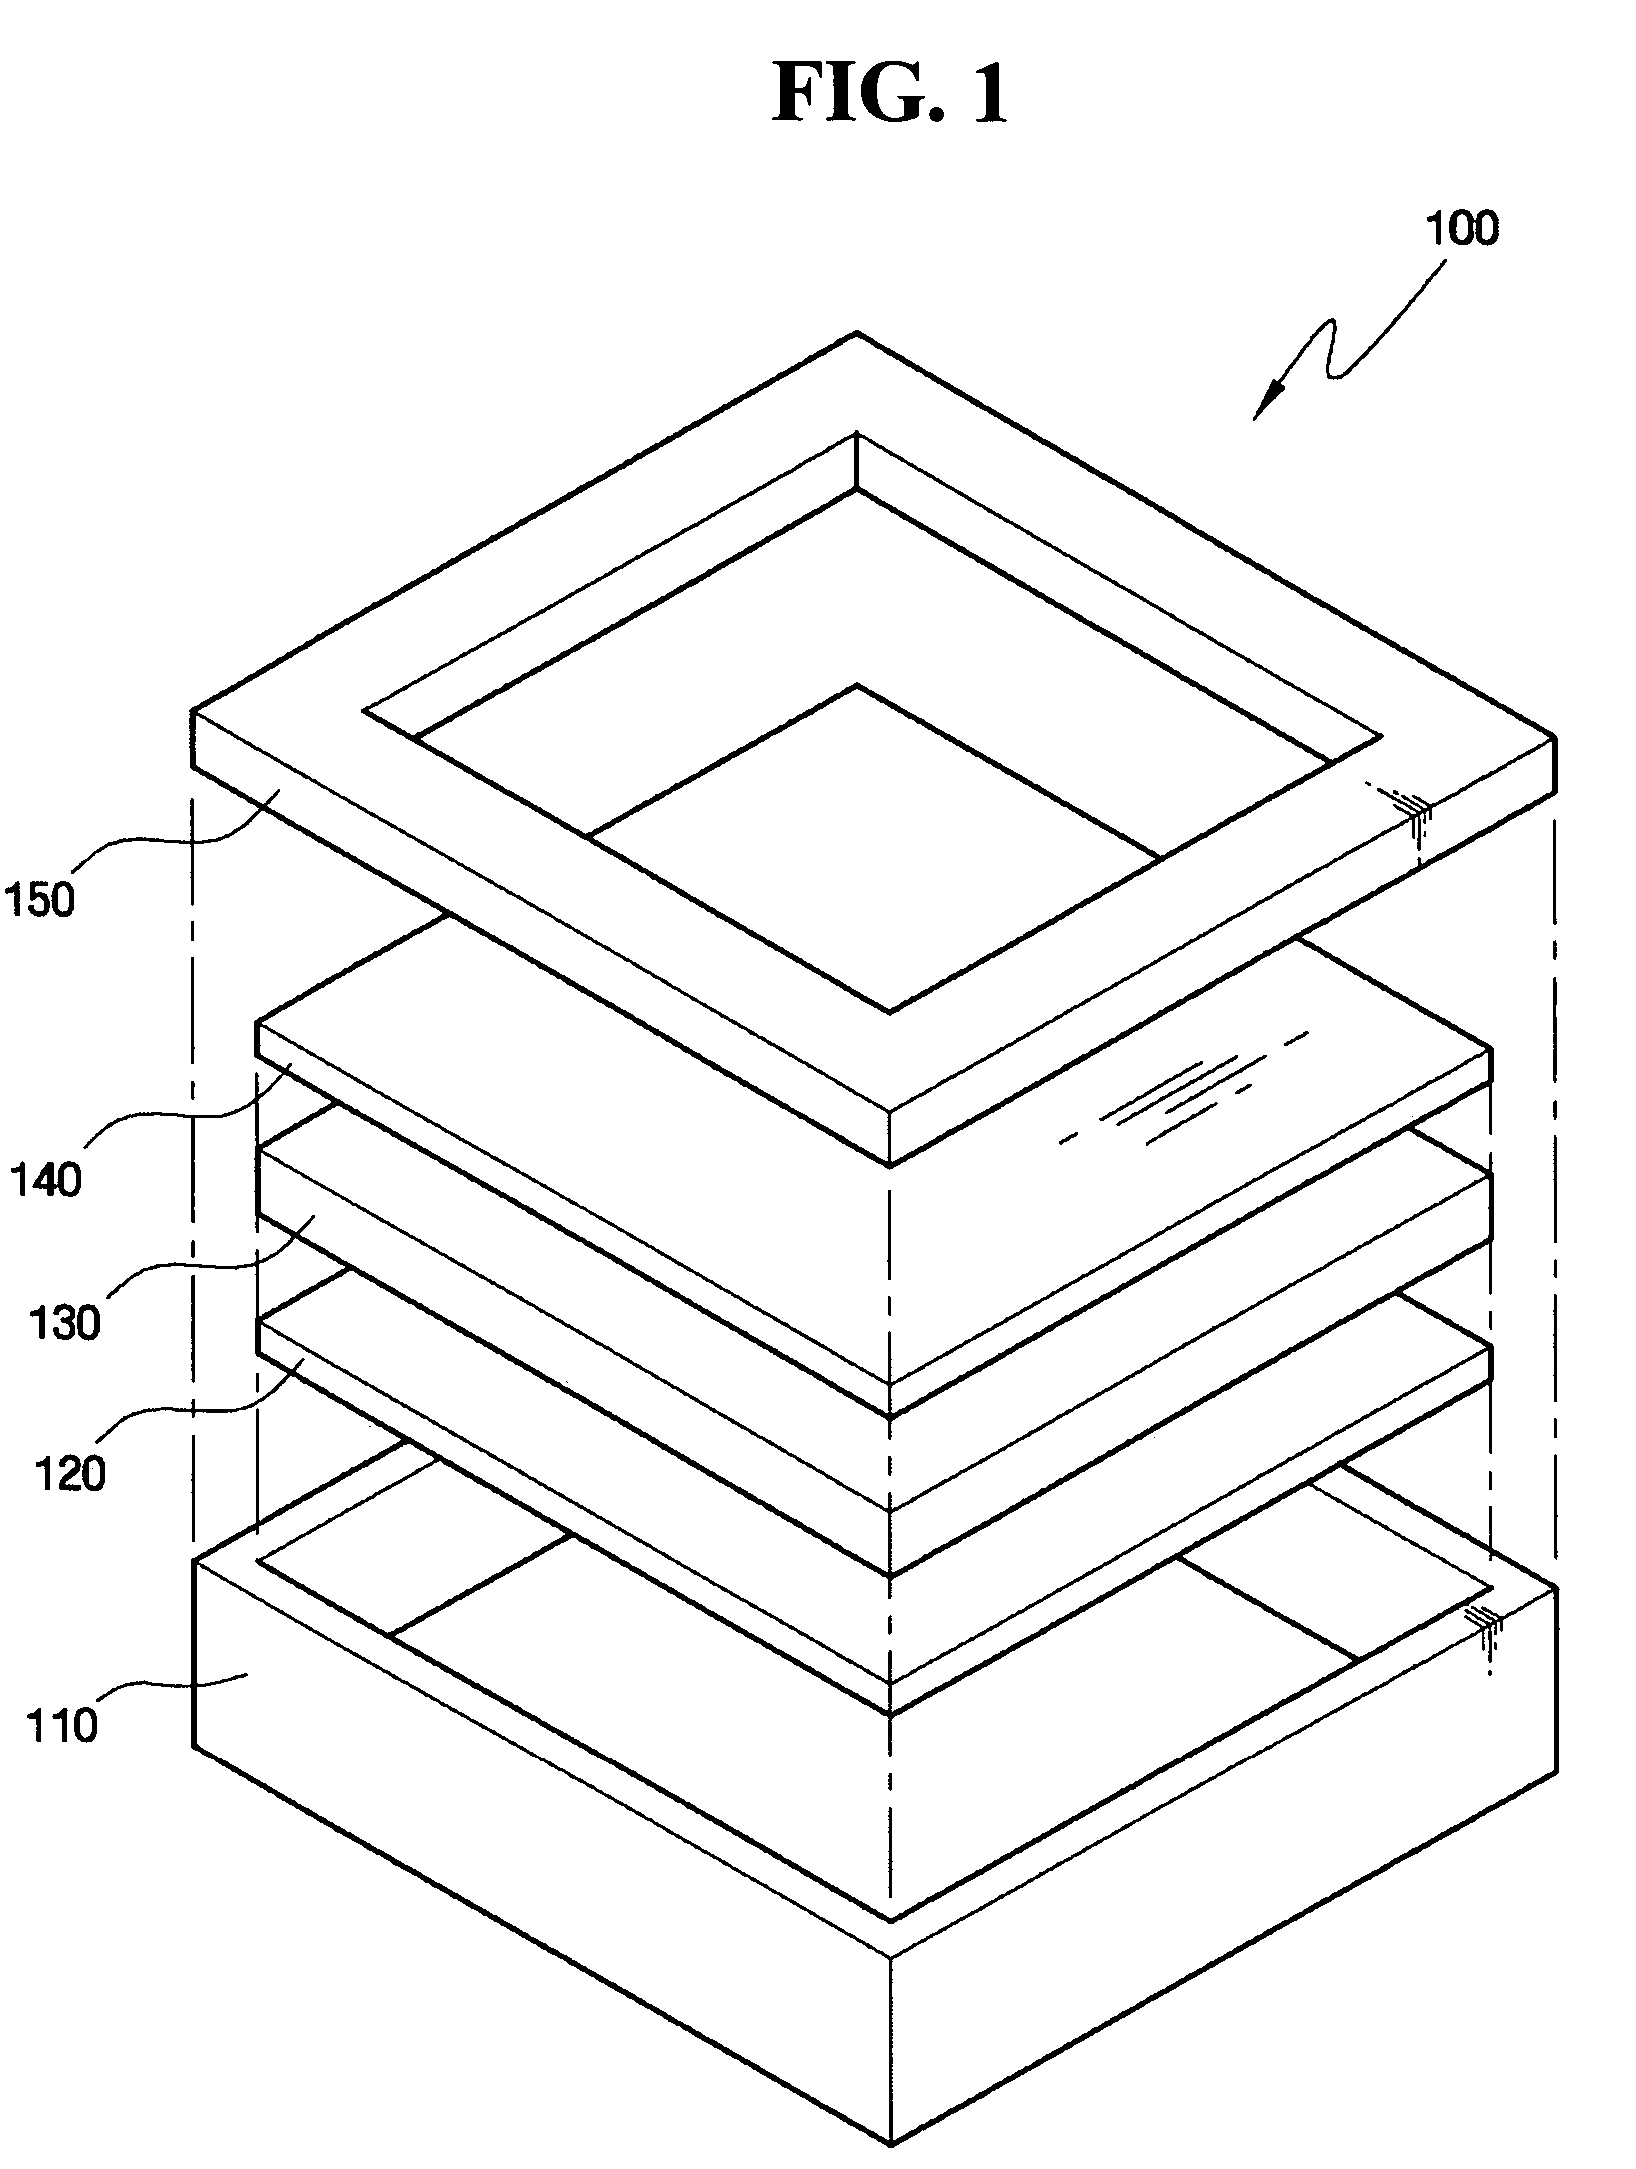 Display filter, display device including the display filter, and method of manufacturing the display filter